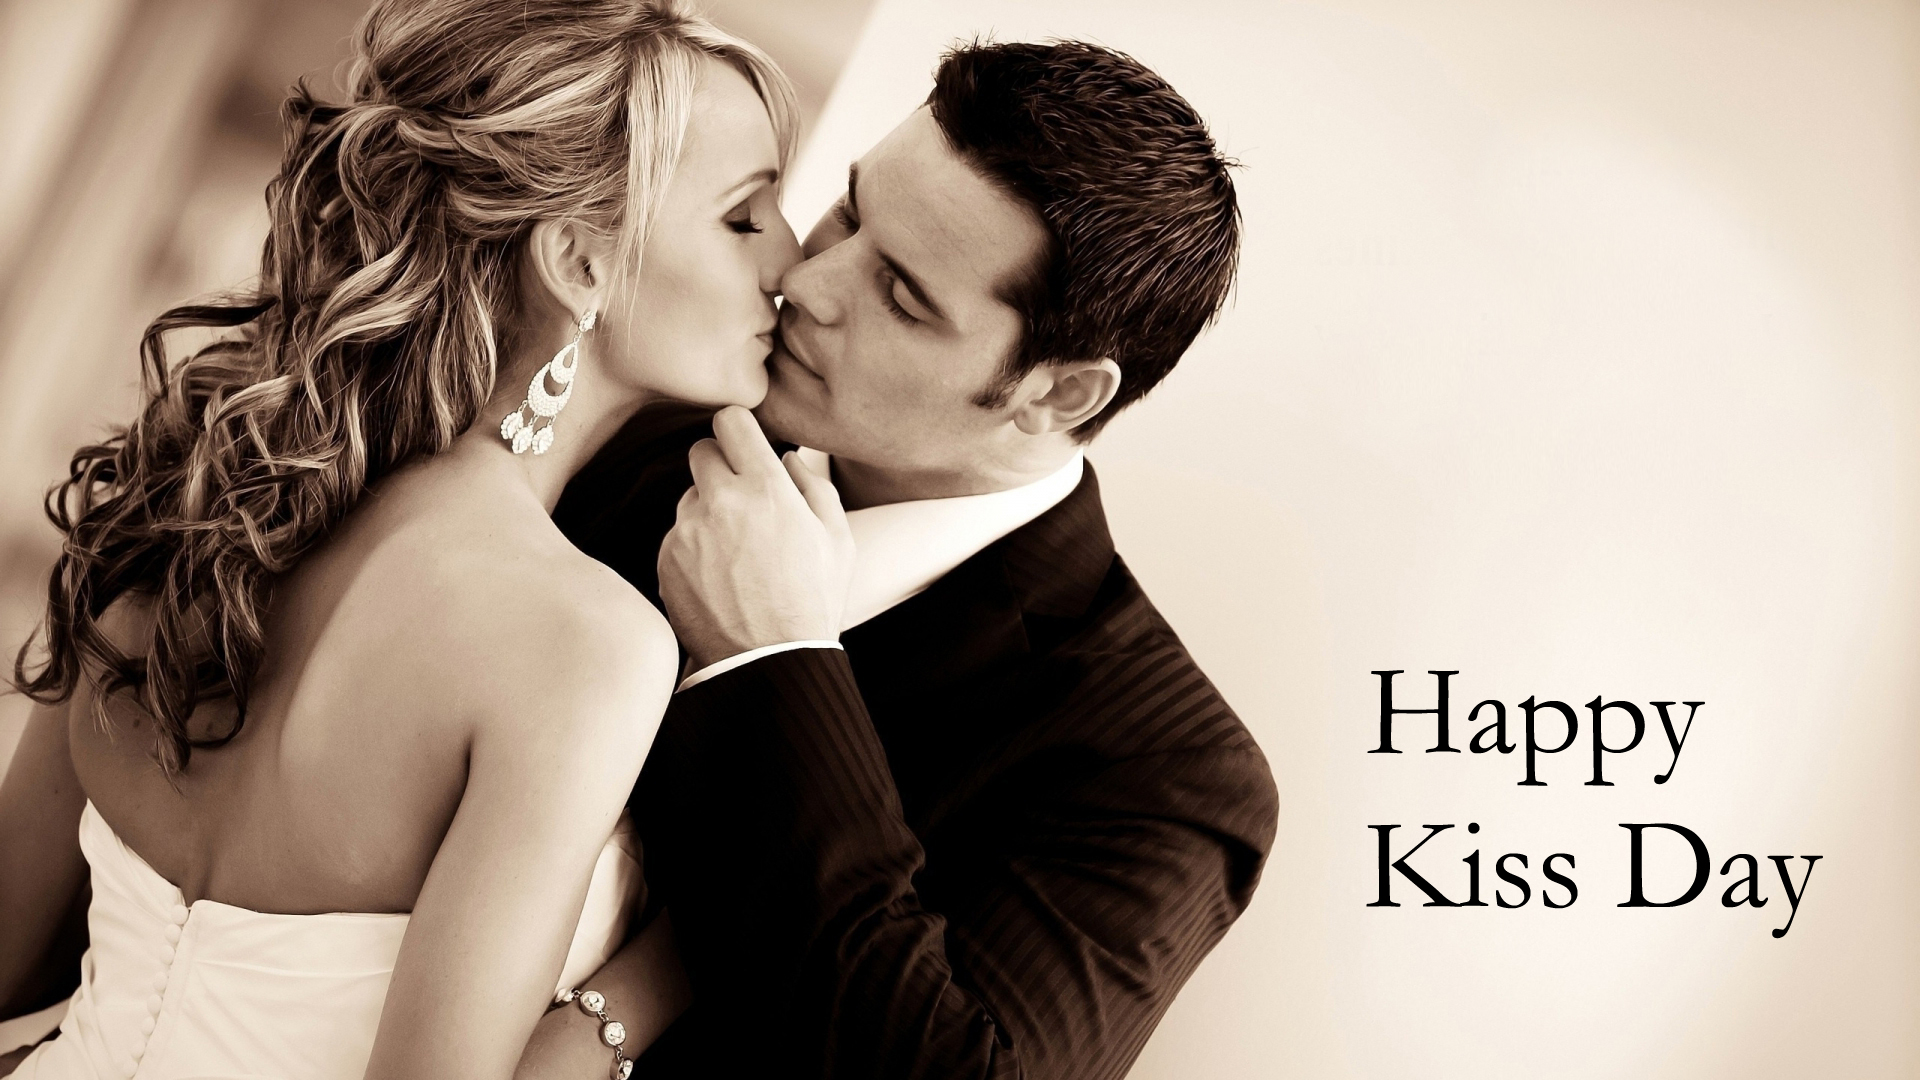 Cute-Kissing-Couple-Wishes-Happy-Kiss-Dayromantic-kiss-day-greting-kiss-day-wallpaperskiss-day-wishes-1